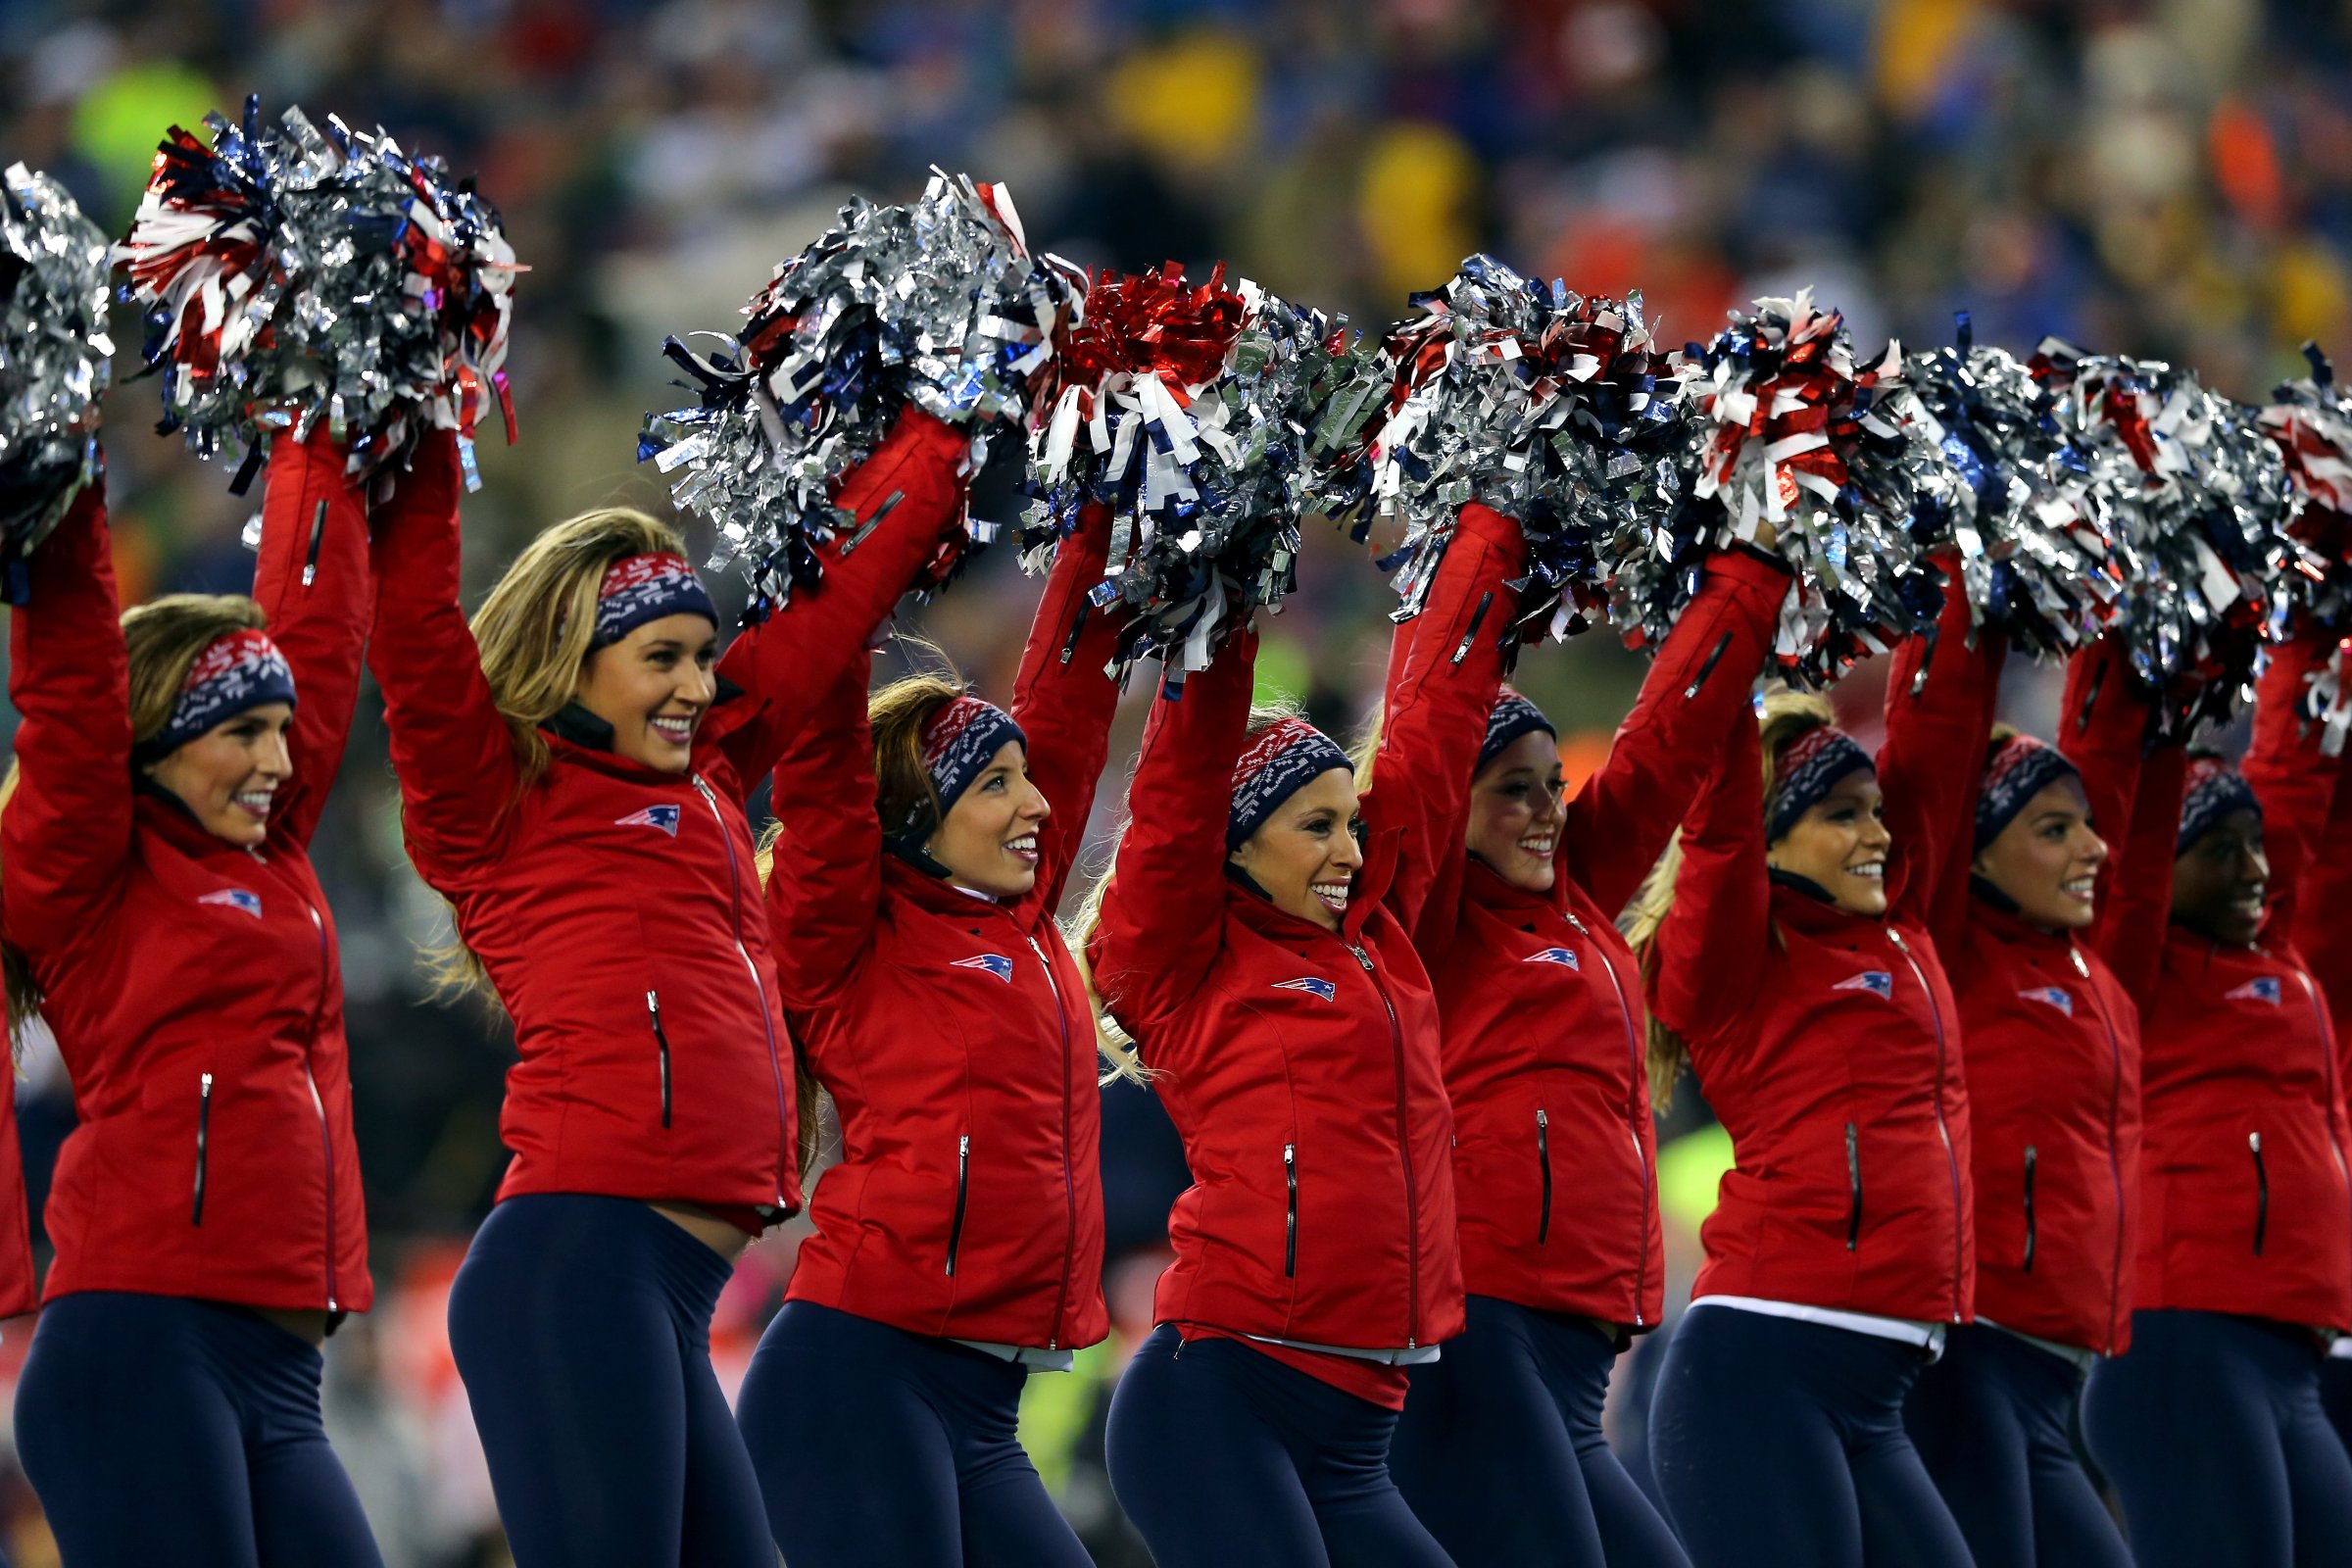 The New England Patriots cheerleaders perform during the 2015 AFC Championship Game on Jan. 18, 2015 in Foxboro, Massachusetts.